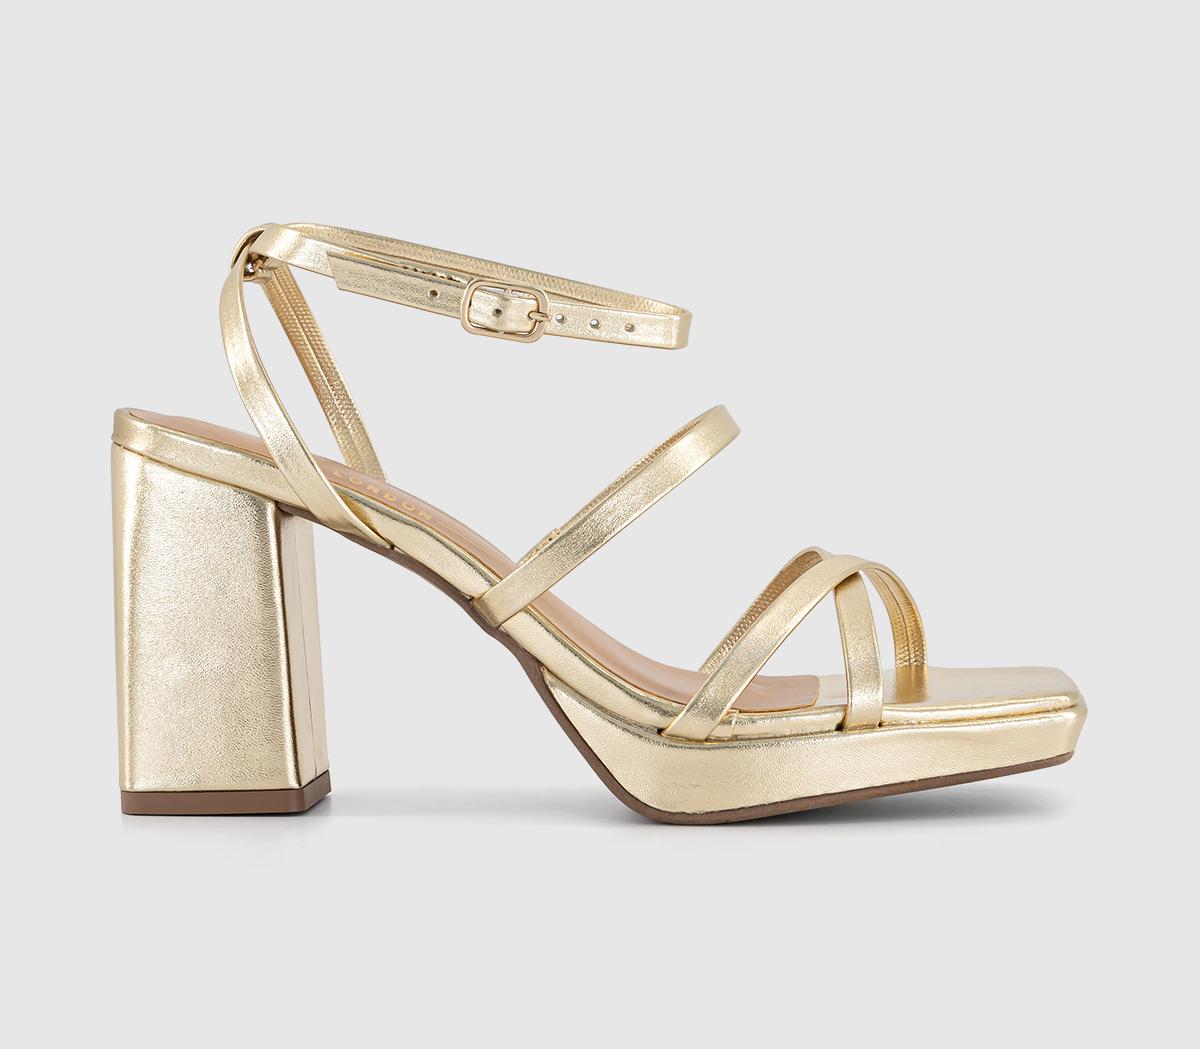 OFFICEHayes Strappy Platform SandalsGold